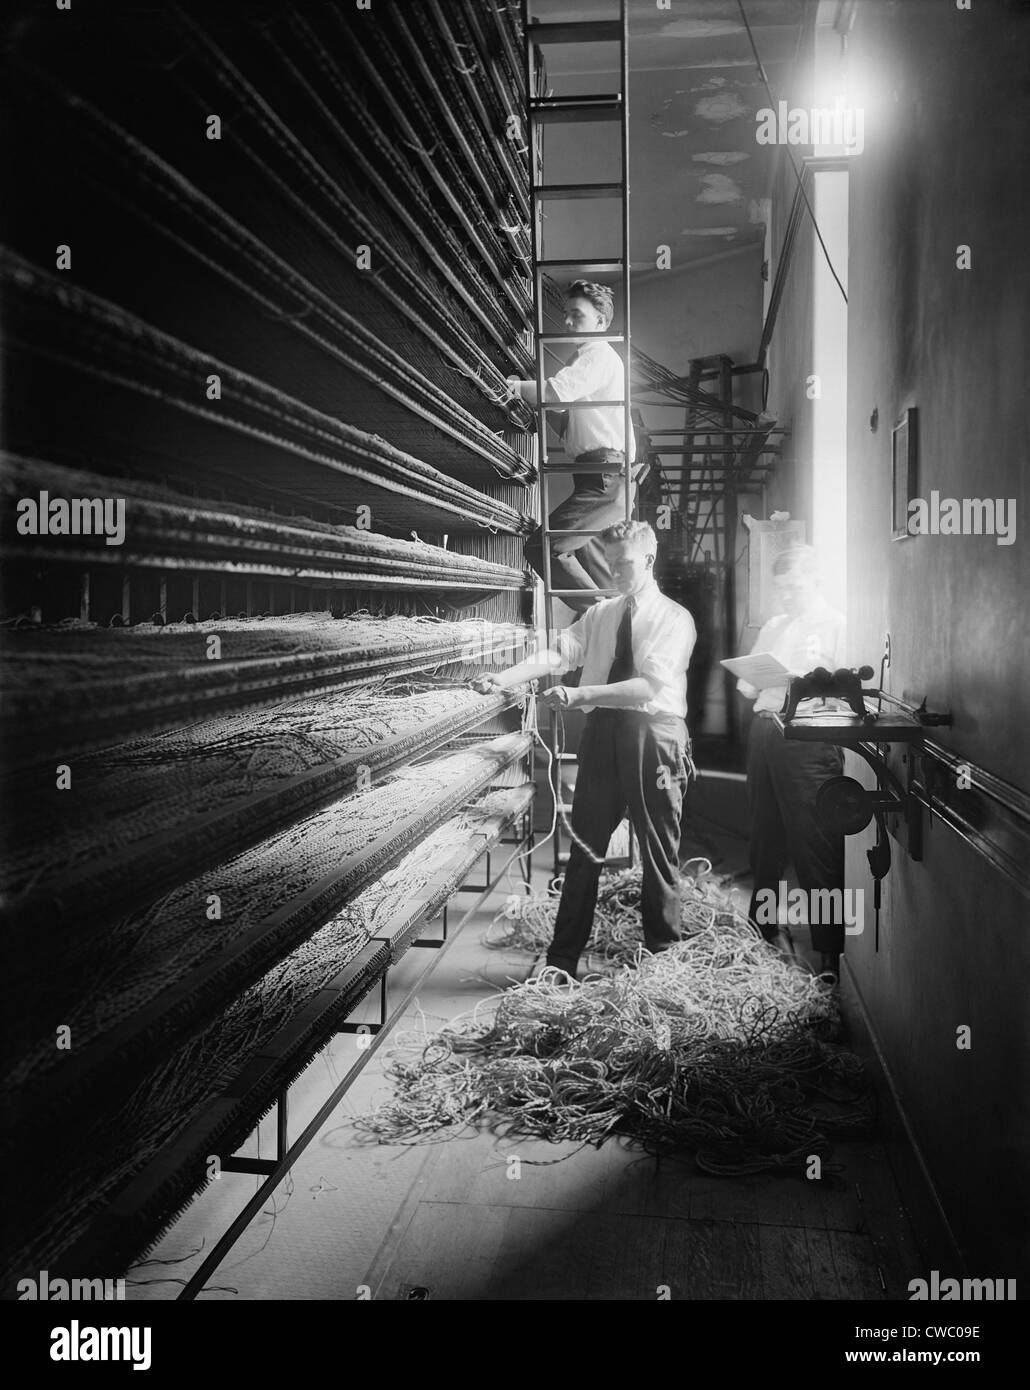 Chesapeake and Potomac Telephone Company wiring installed on tiers of shelving in Washington, D.C. area, ca. 1925. Stock Photo